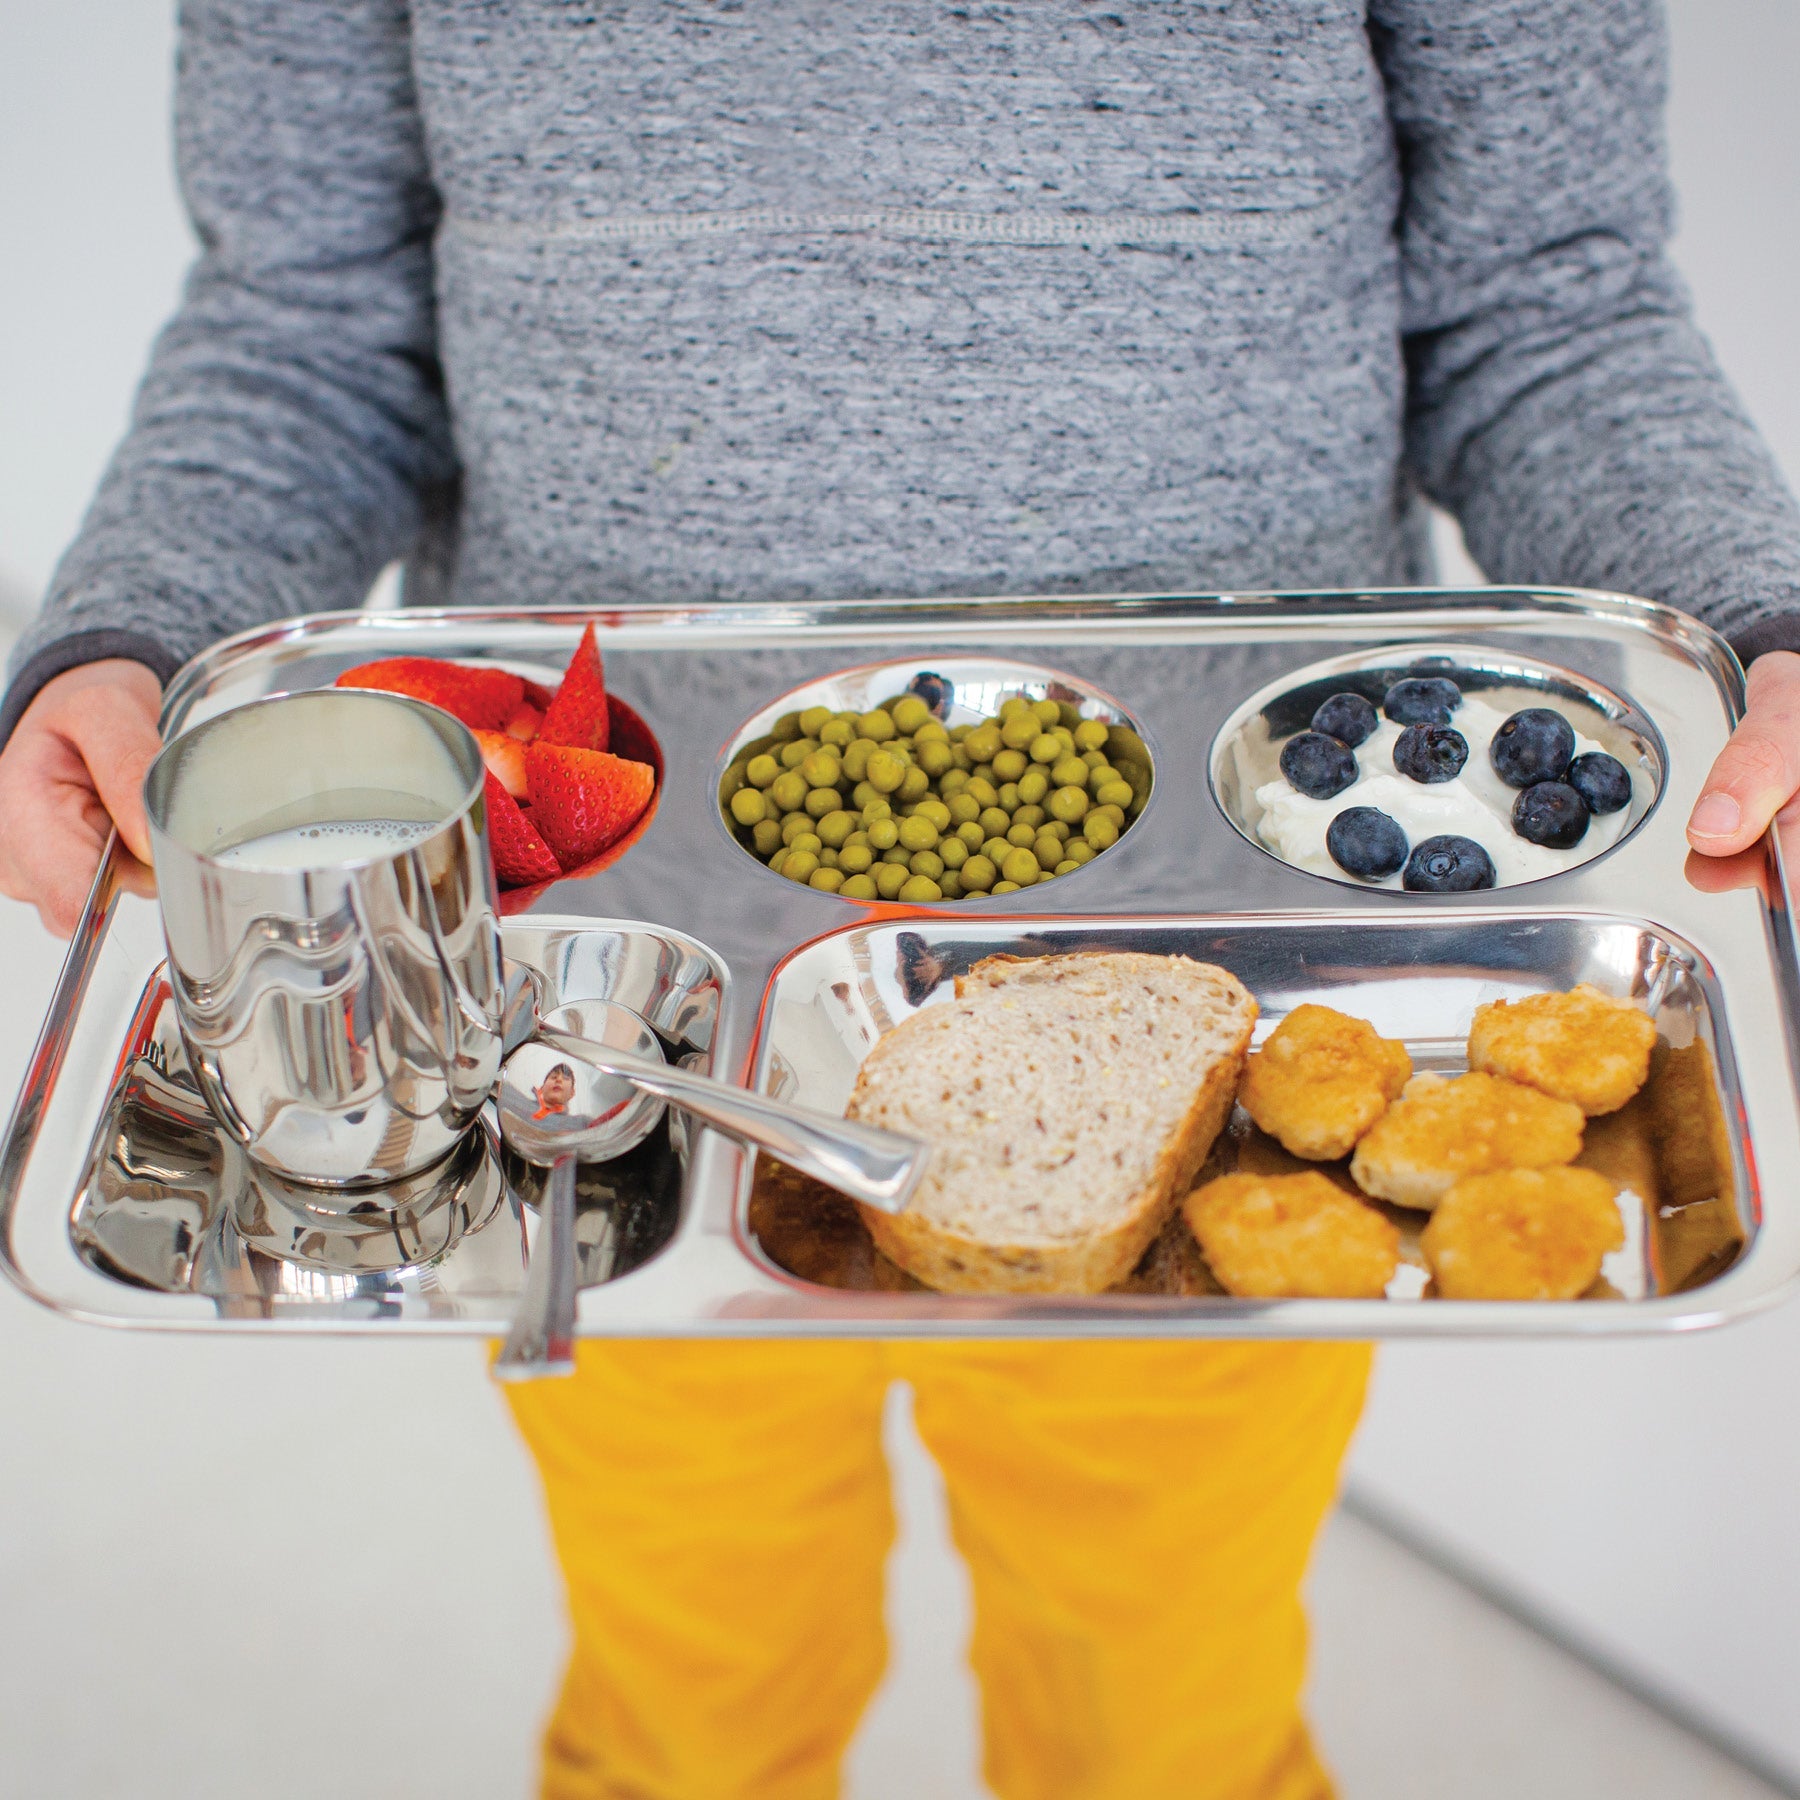 Green cafeteria and safe foodware - our stainless steel trays have rounded edges for safe holding.